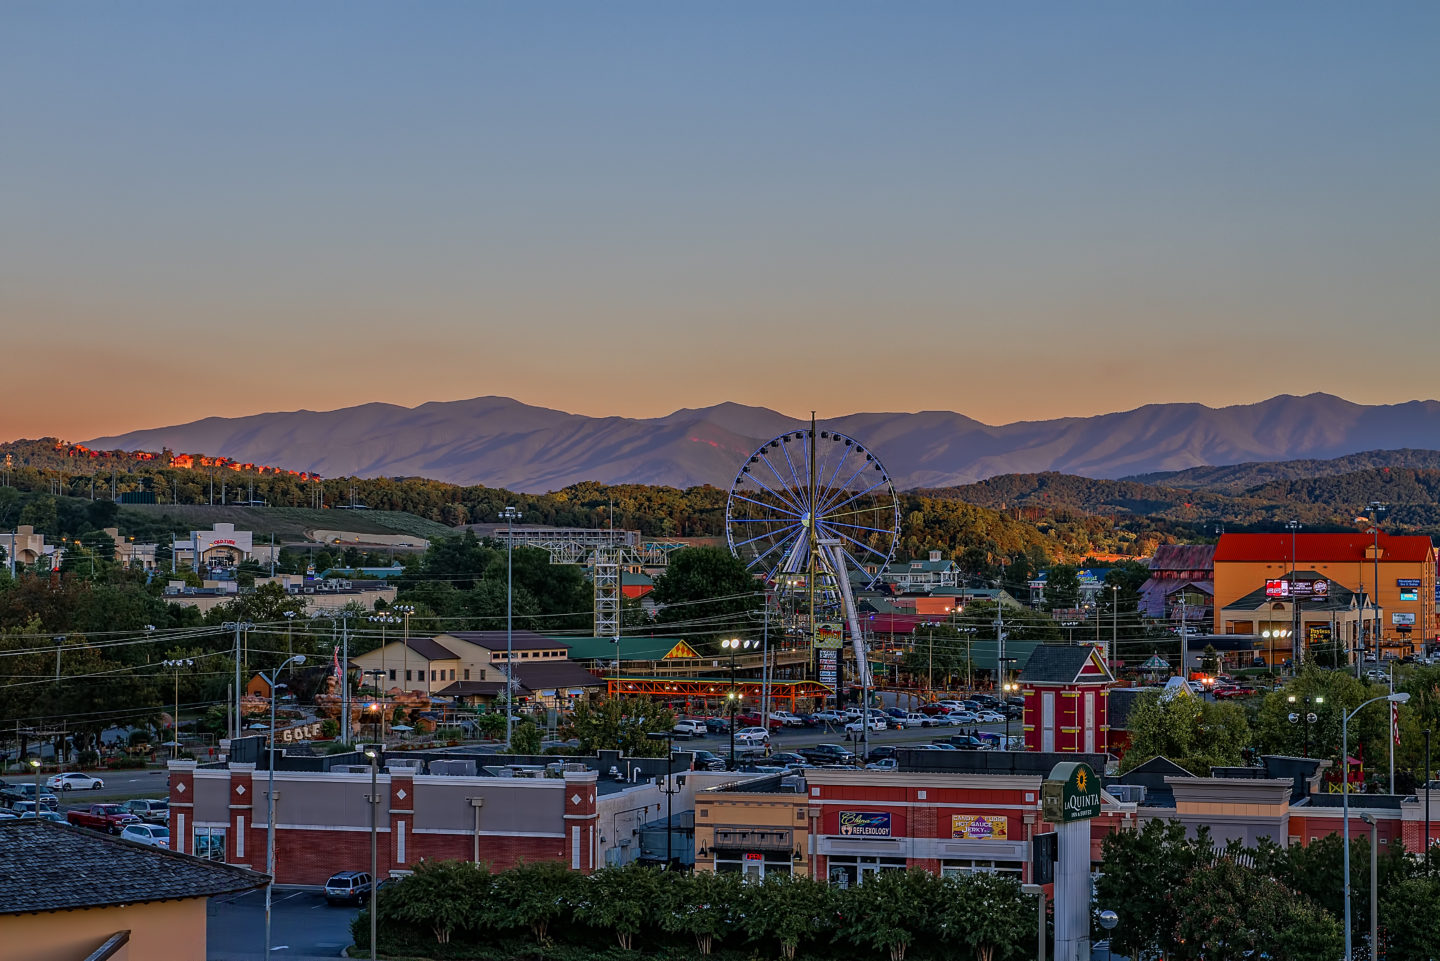 Whats Open In Pigeon Forge Gatlinburg Sevierville Official Informationthe Official Pigeon Forge Chamber Of Commerce